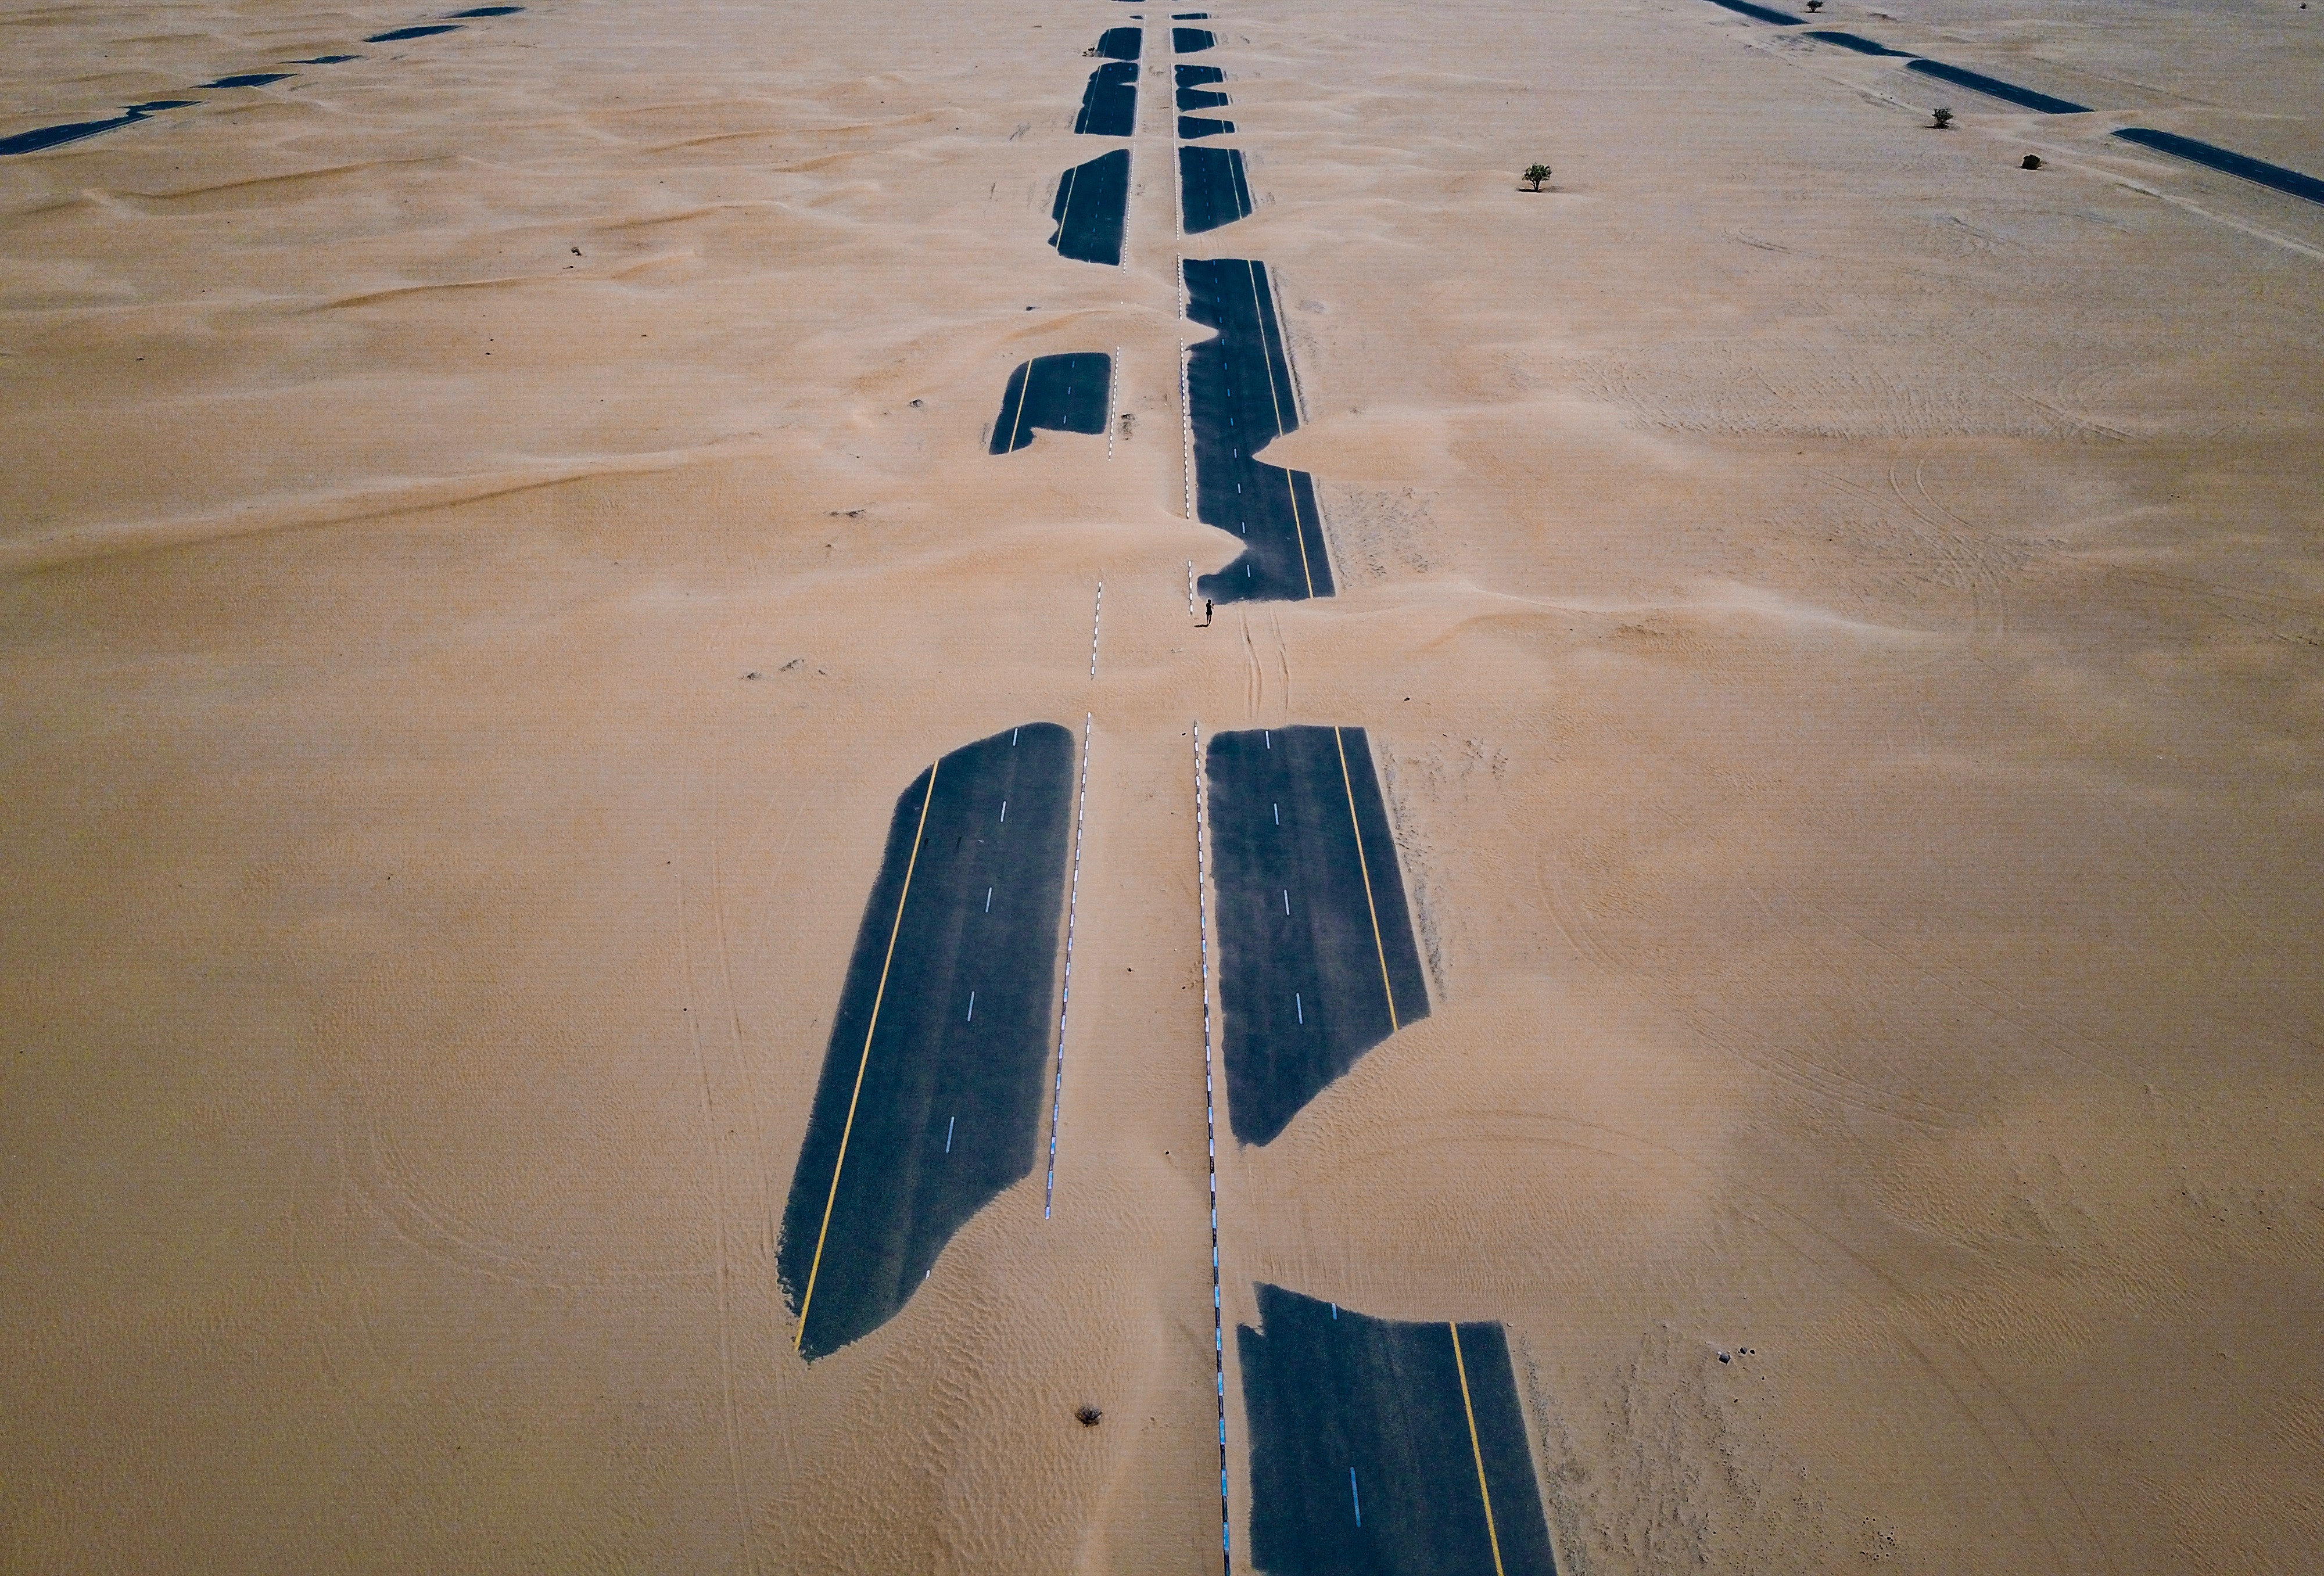 "Road partially covered by sand"